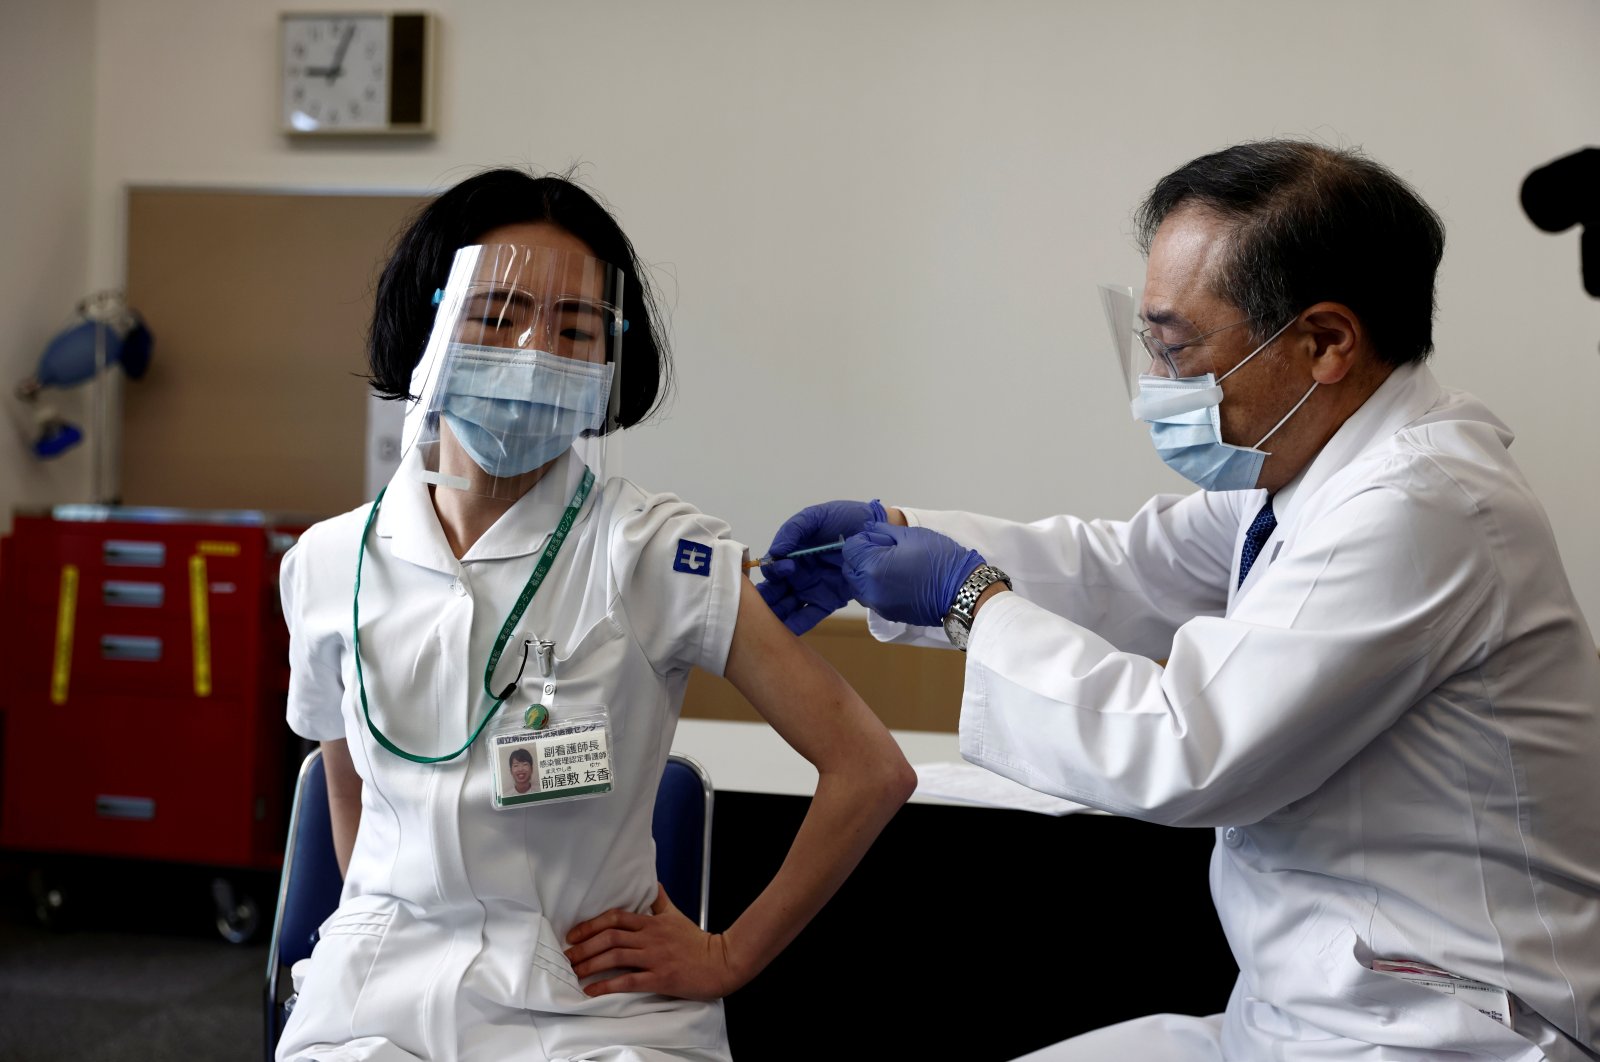 A medical worker receives a dose of the coronavirus vaccine as the country launches its inoculation campaign, in Tokyo, Japan, Feb. 17, 2021. (Reuters Photo)